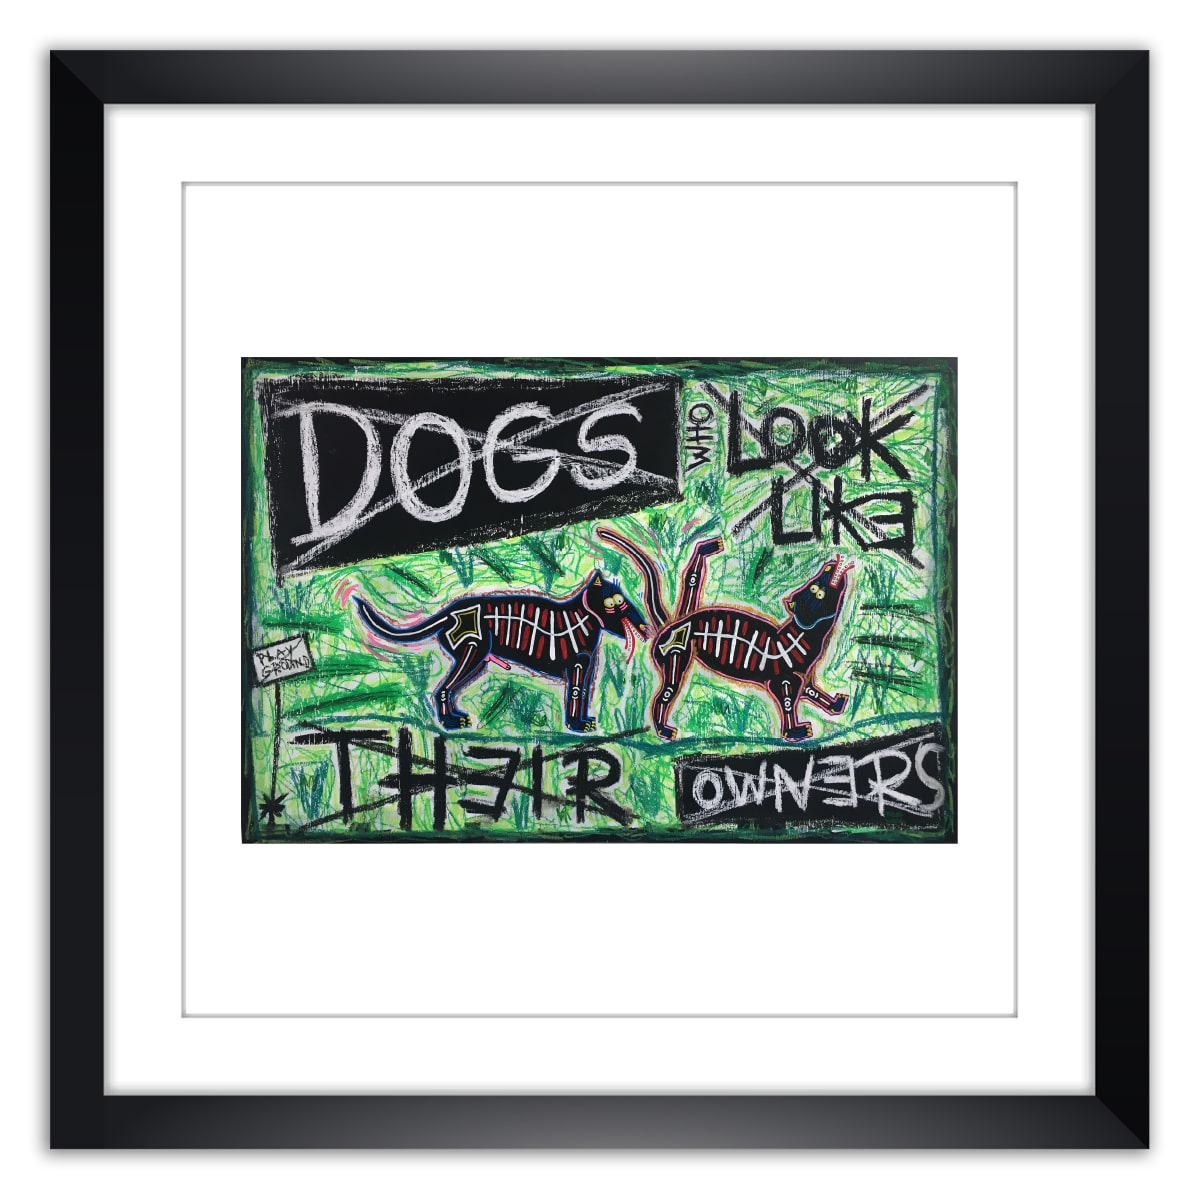 Limited prints - DOGS WHO LOOK LIKE THEIR OWNERS framed - Frank Willems